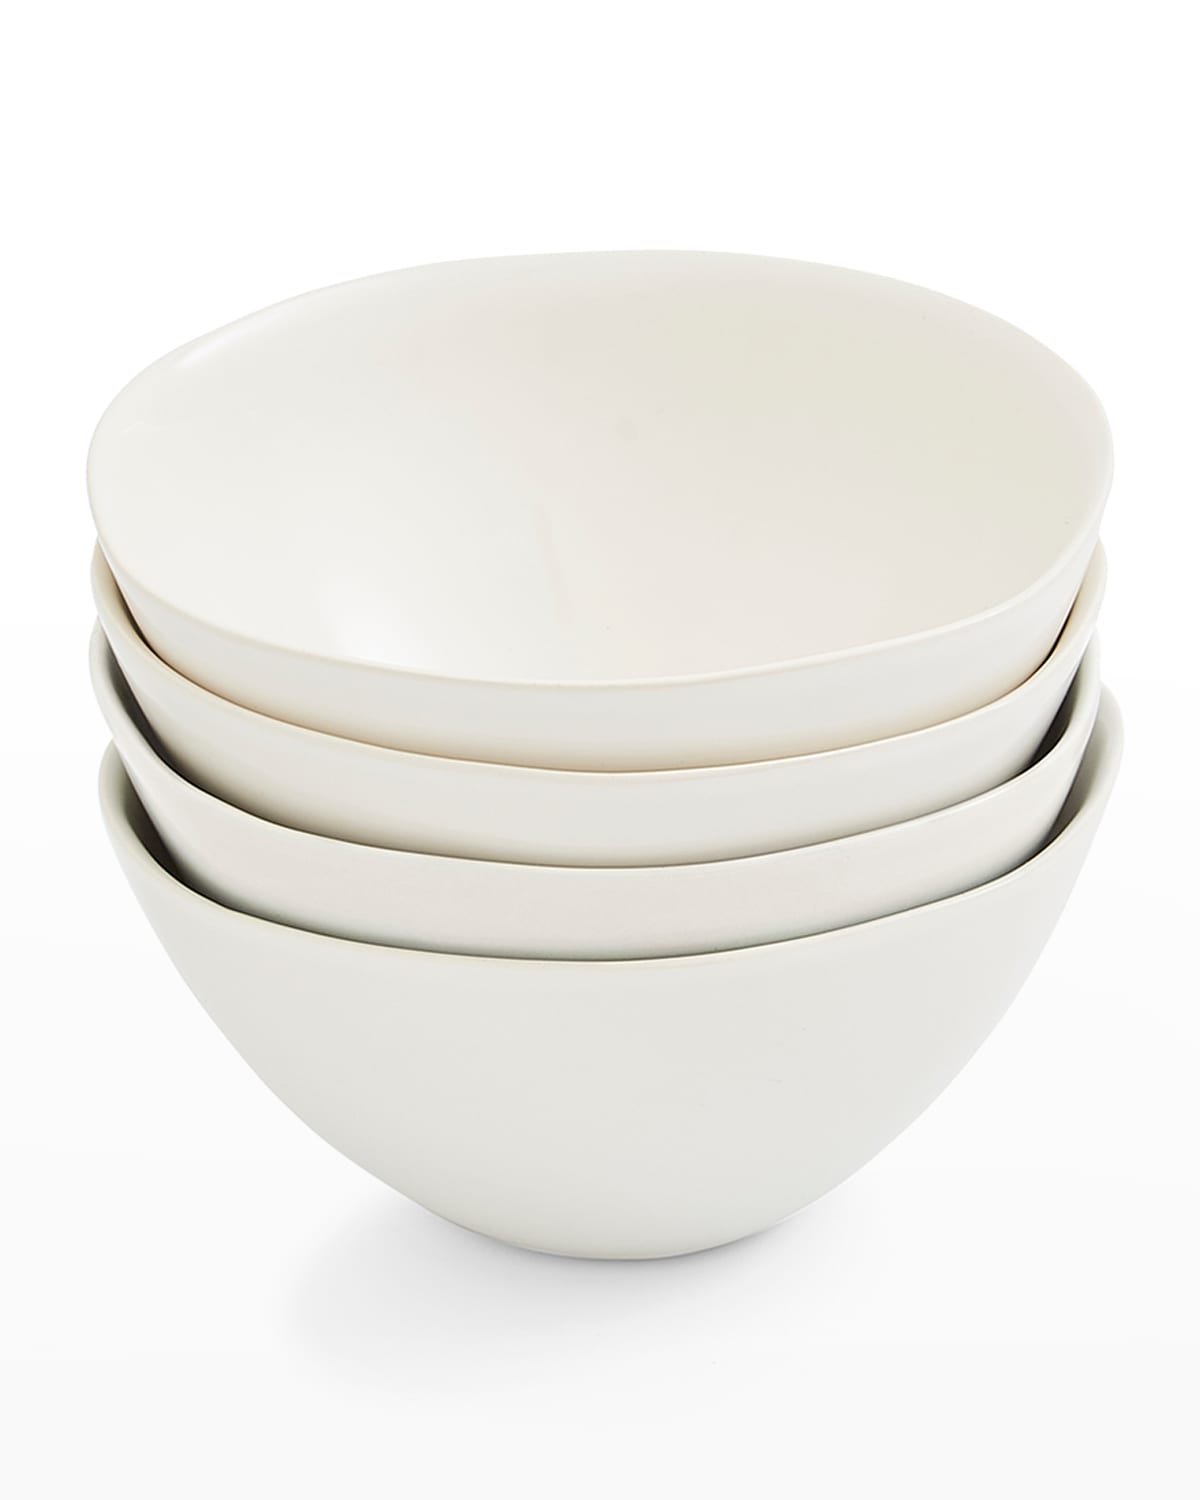 Portmeirion Sophie Conran Arbor All Purpose Bowls, Set Of 4 In Creamy White